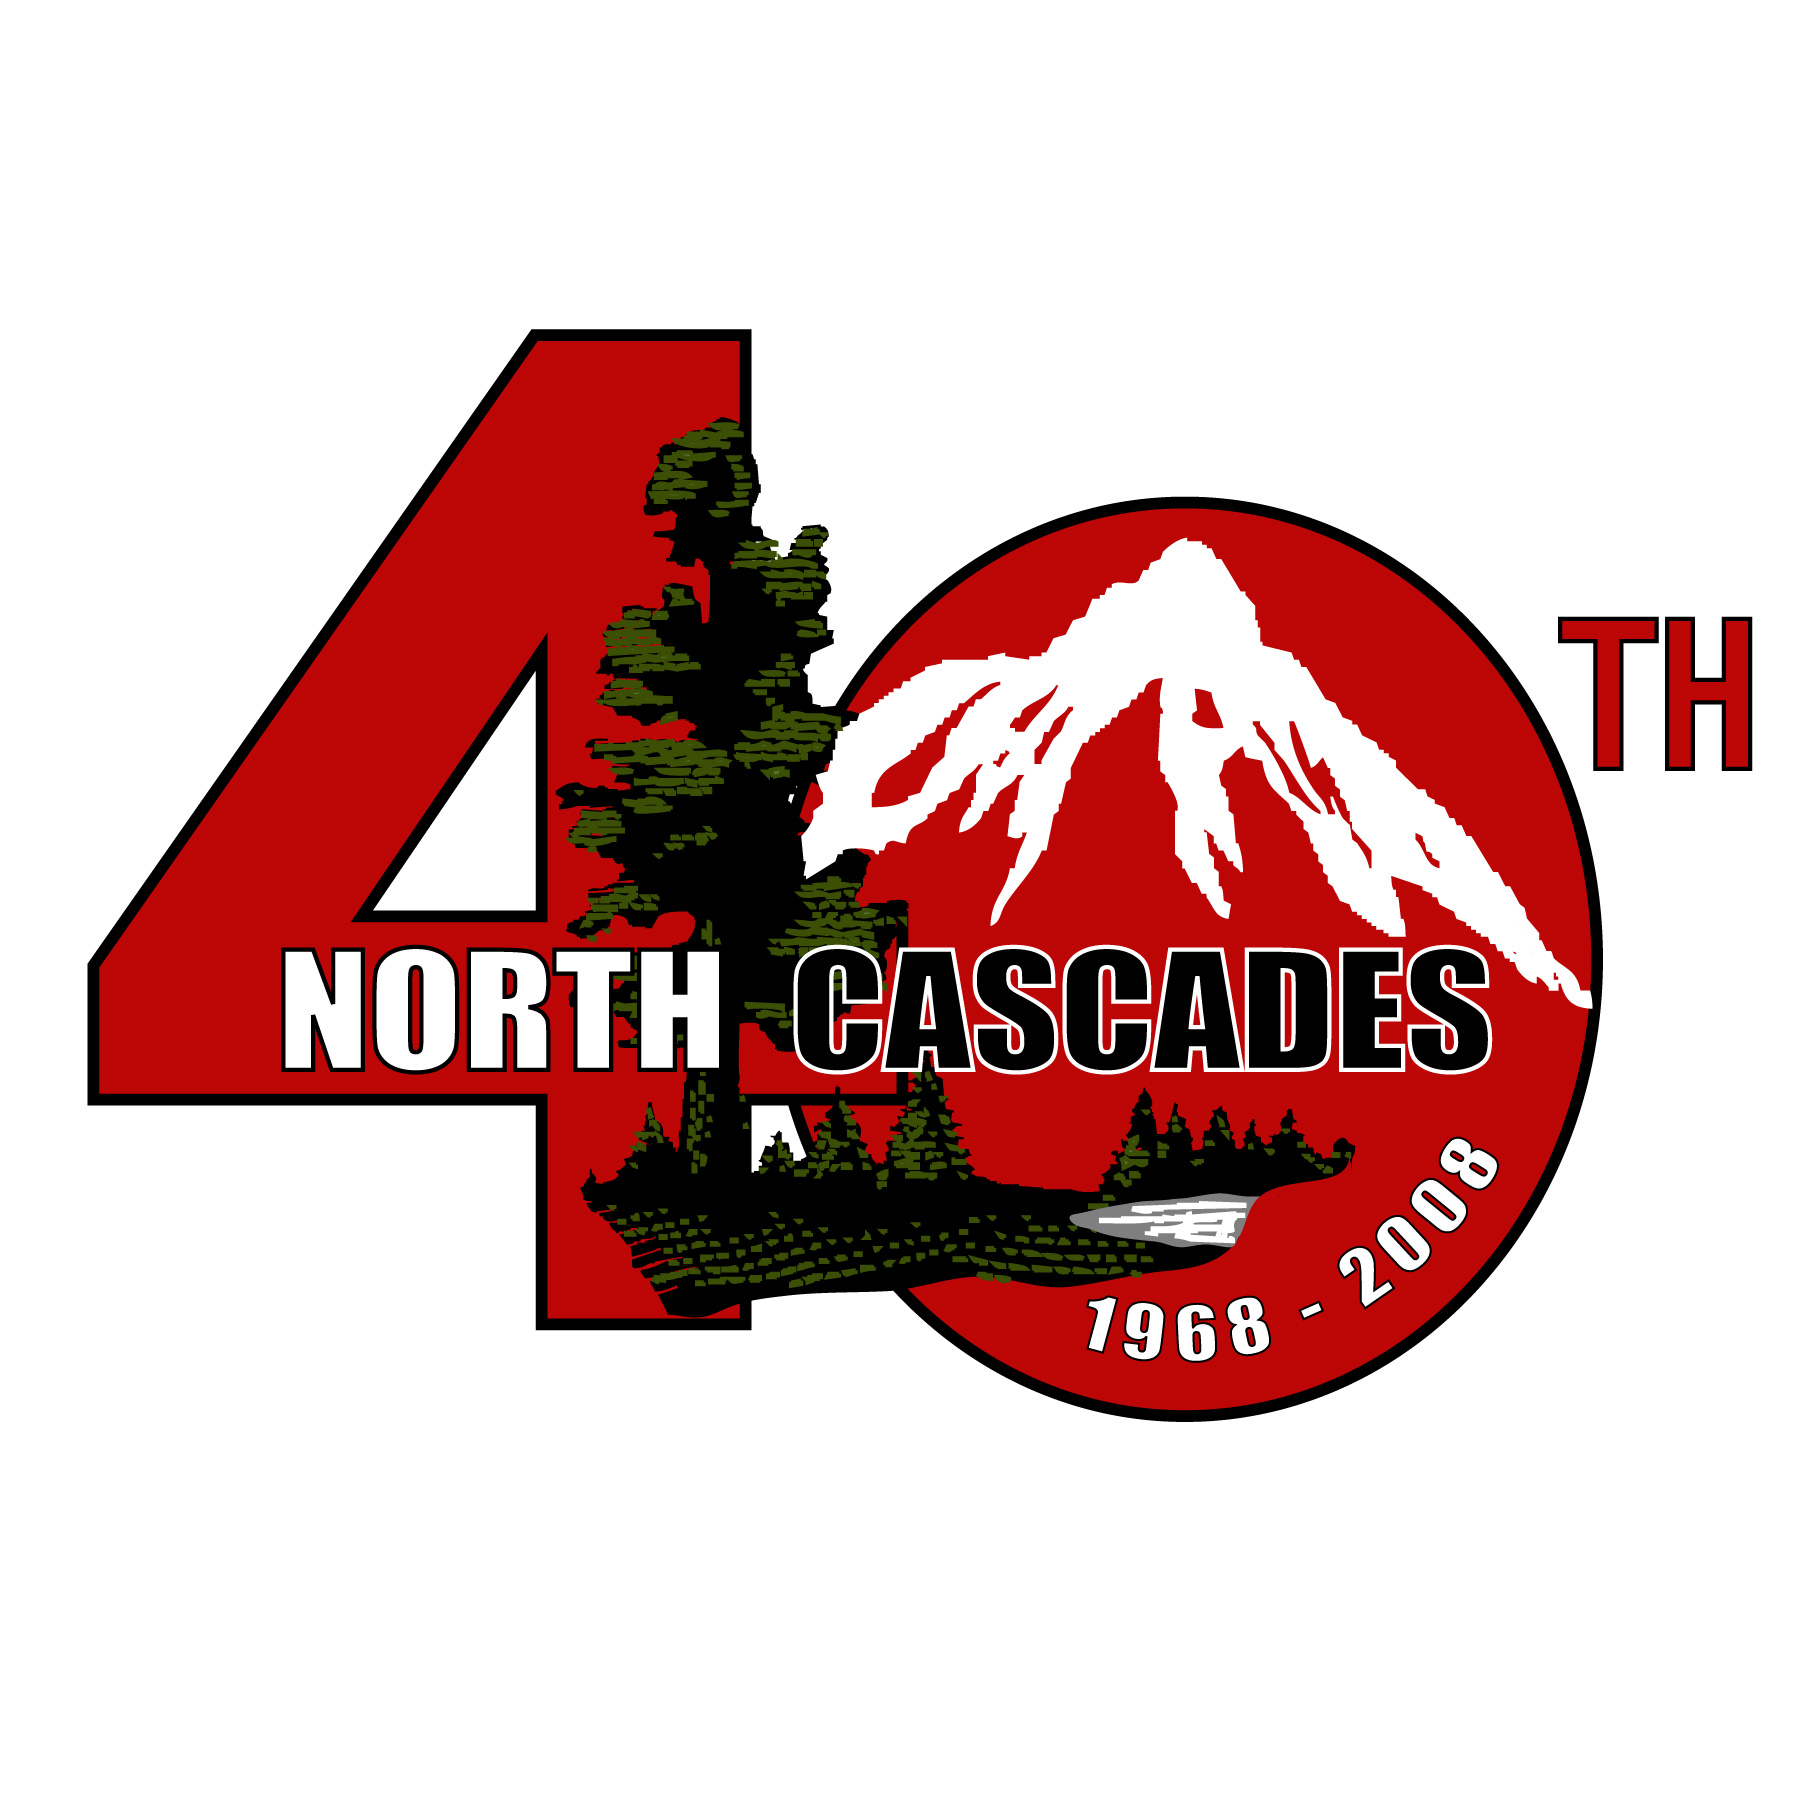 40th Anniversary of North Cascades National Park